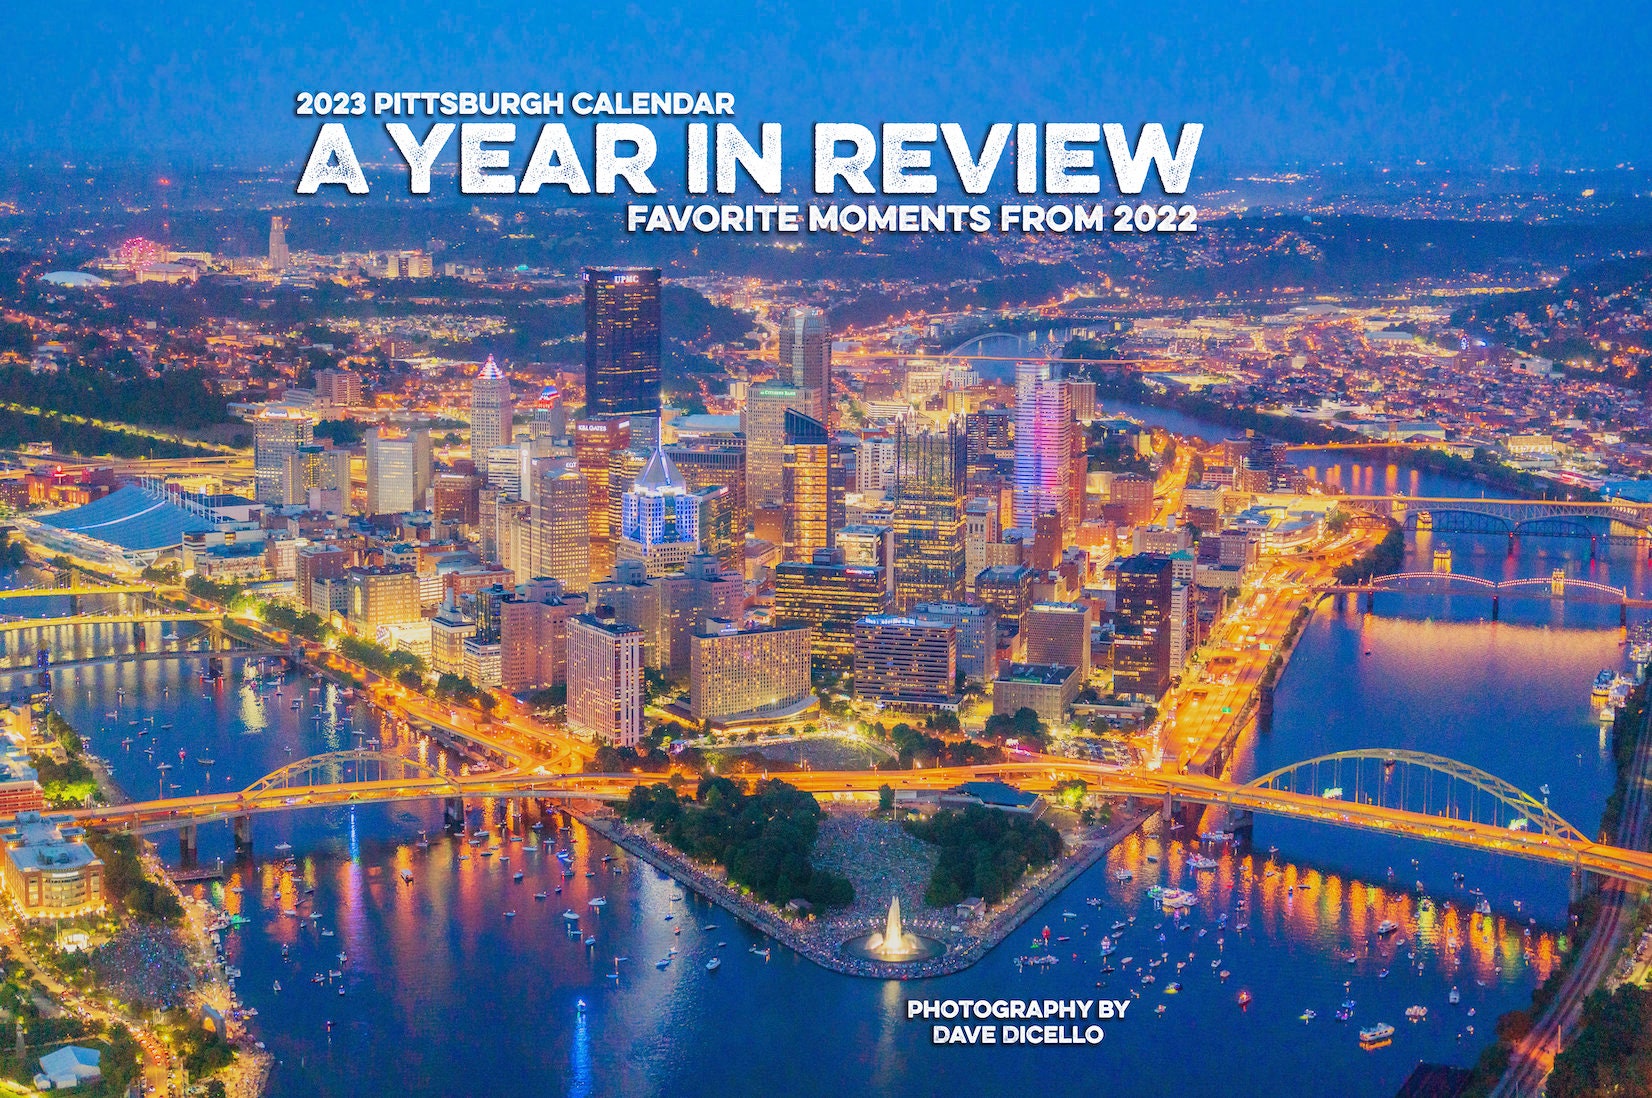 2023 Pittsburgh Calendar My favorite images of the year